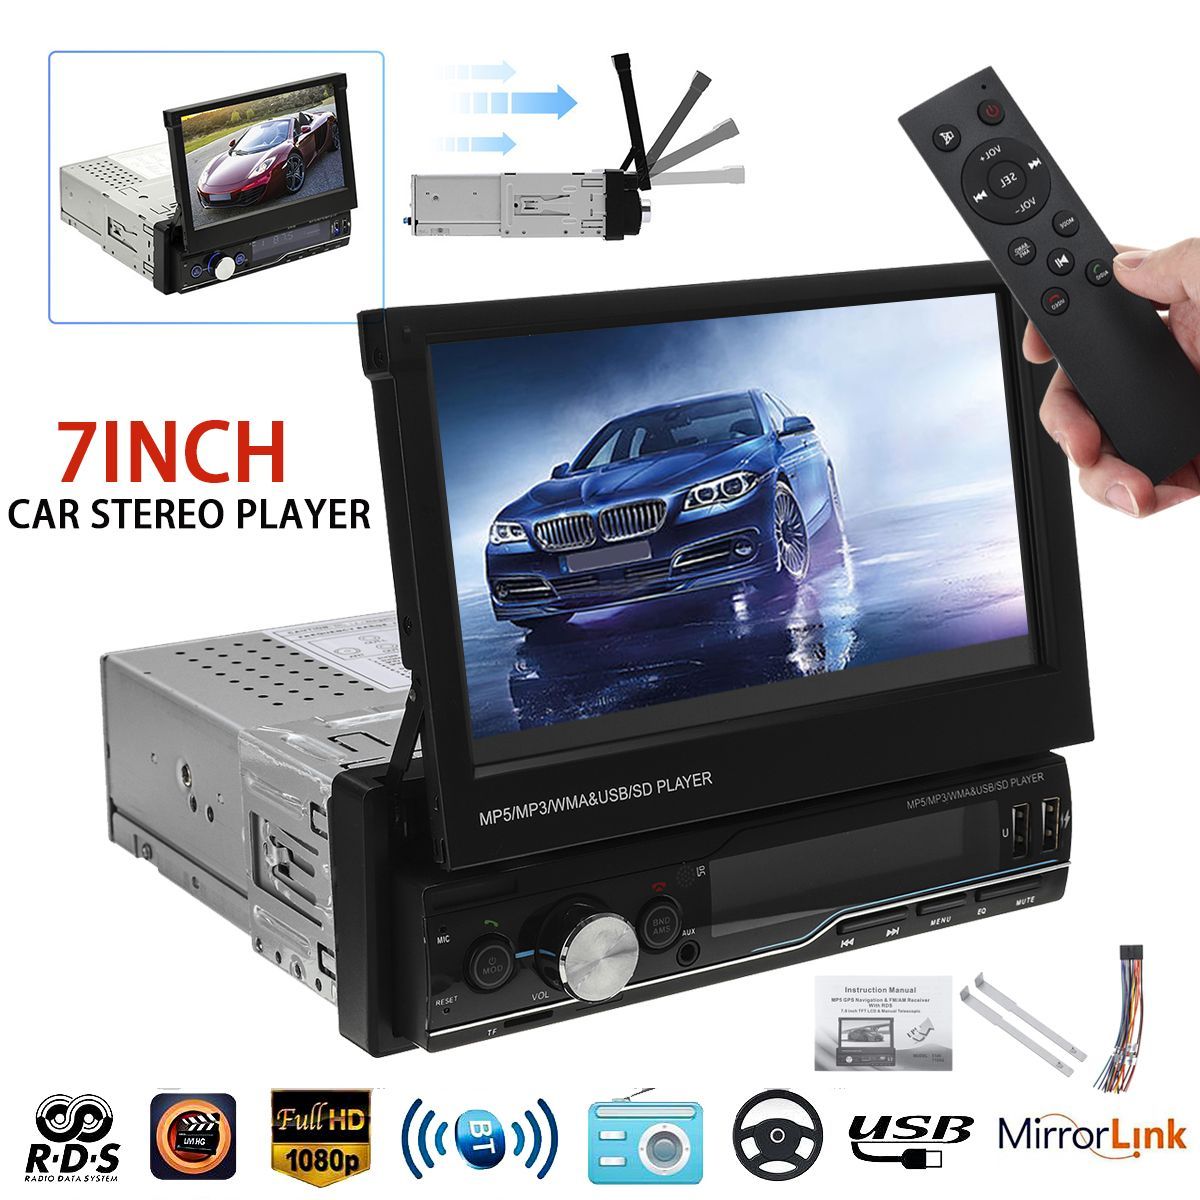 T100-7-Inch-1-Din-Wince-Car-Stereo-Radio-MP5-Player-Hands-free-FM-AM-bluetooth-USB-RDS-AUX-1632192